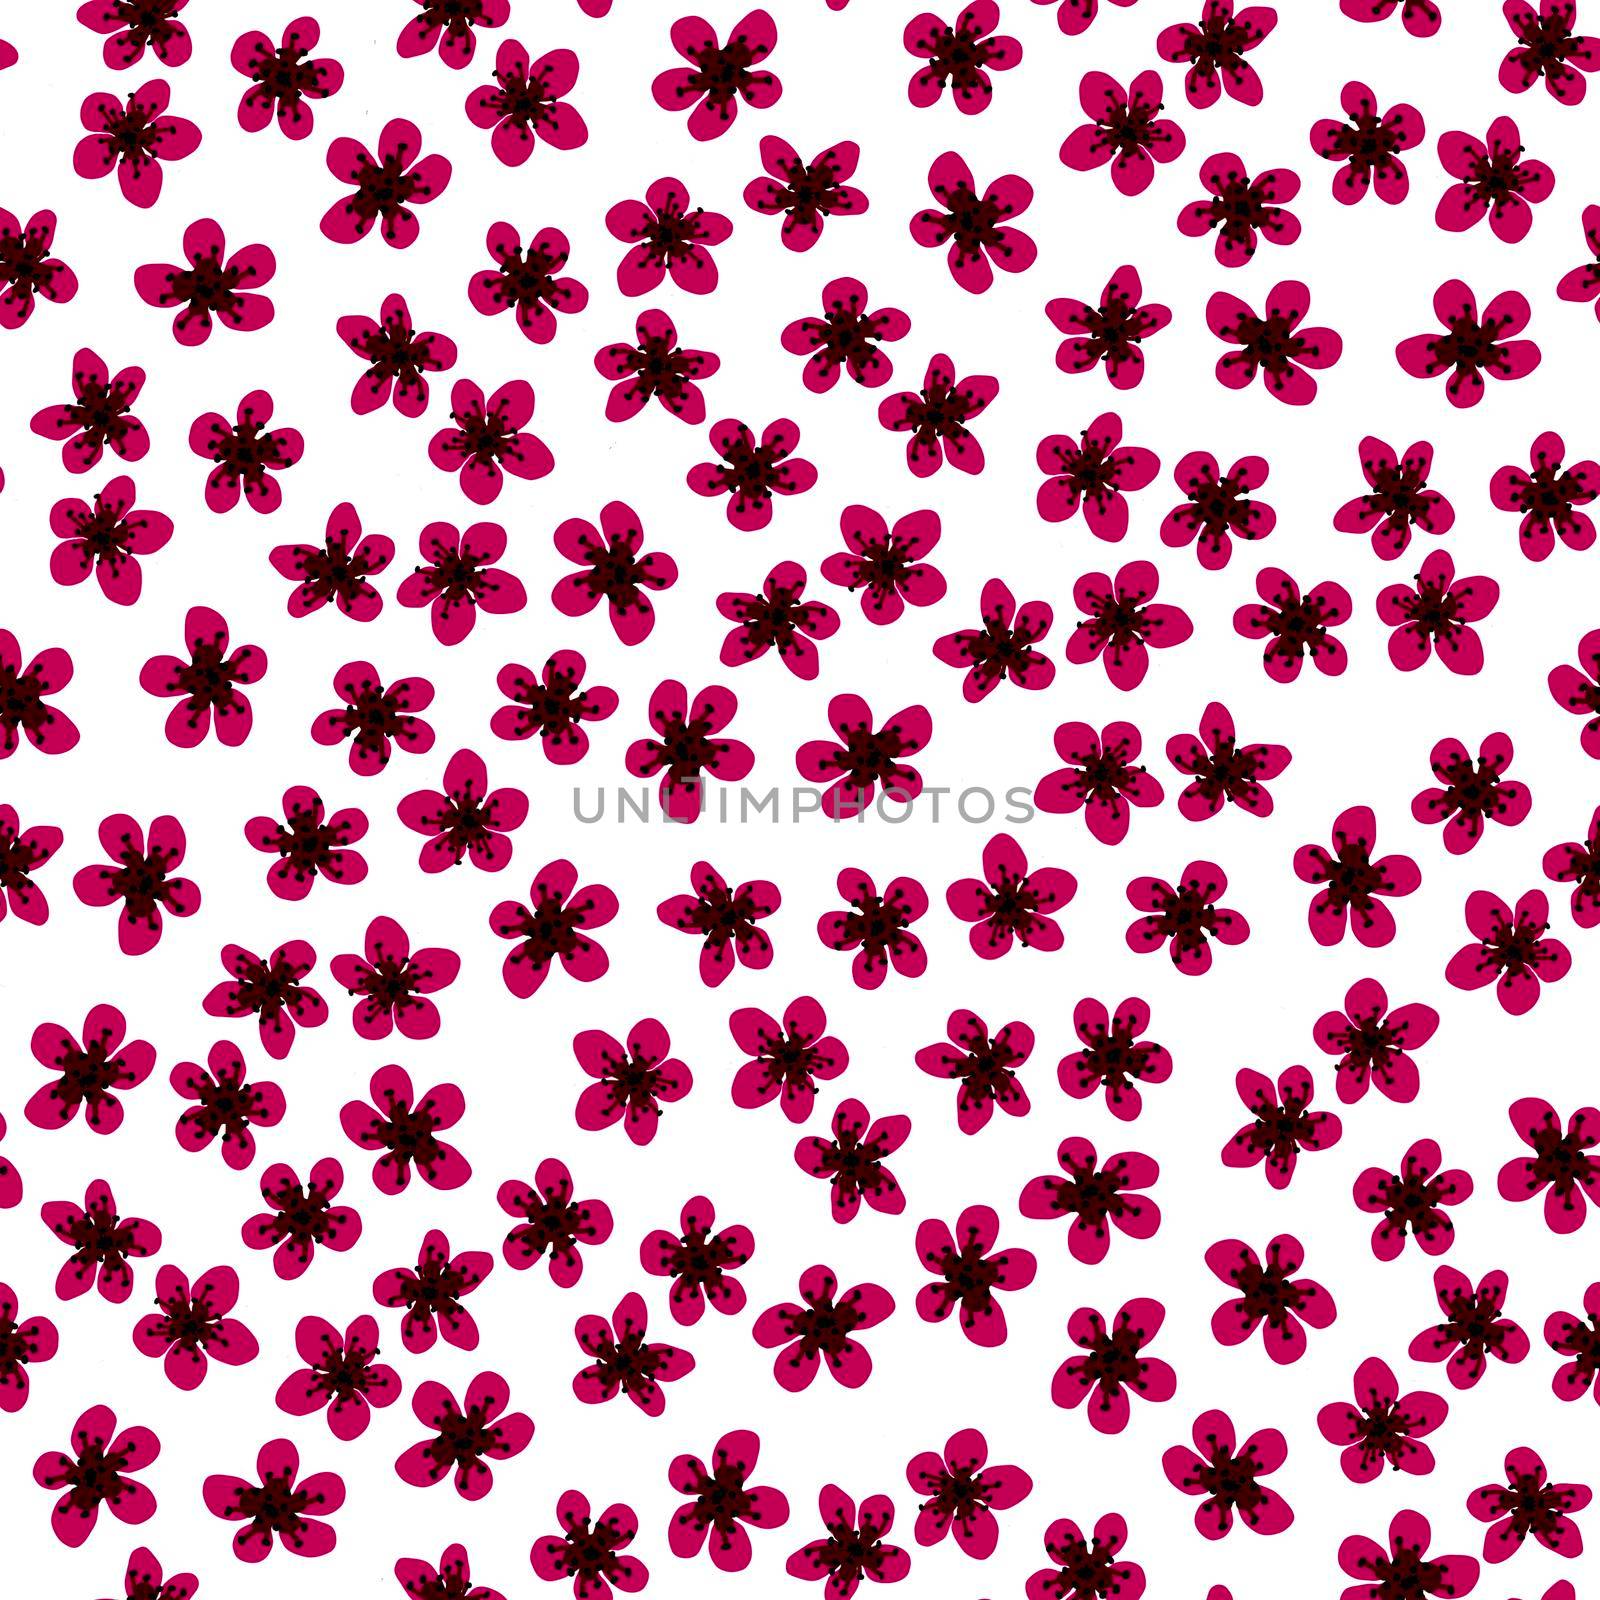 Seamless pattern with blossoming Japanese cherry sakura for fabric, packaging, wallpaper, textile decor, design, invitations, print, gift wrap, manufacturing. Fuchsia flowers on white background. by Angelsmoon